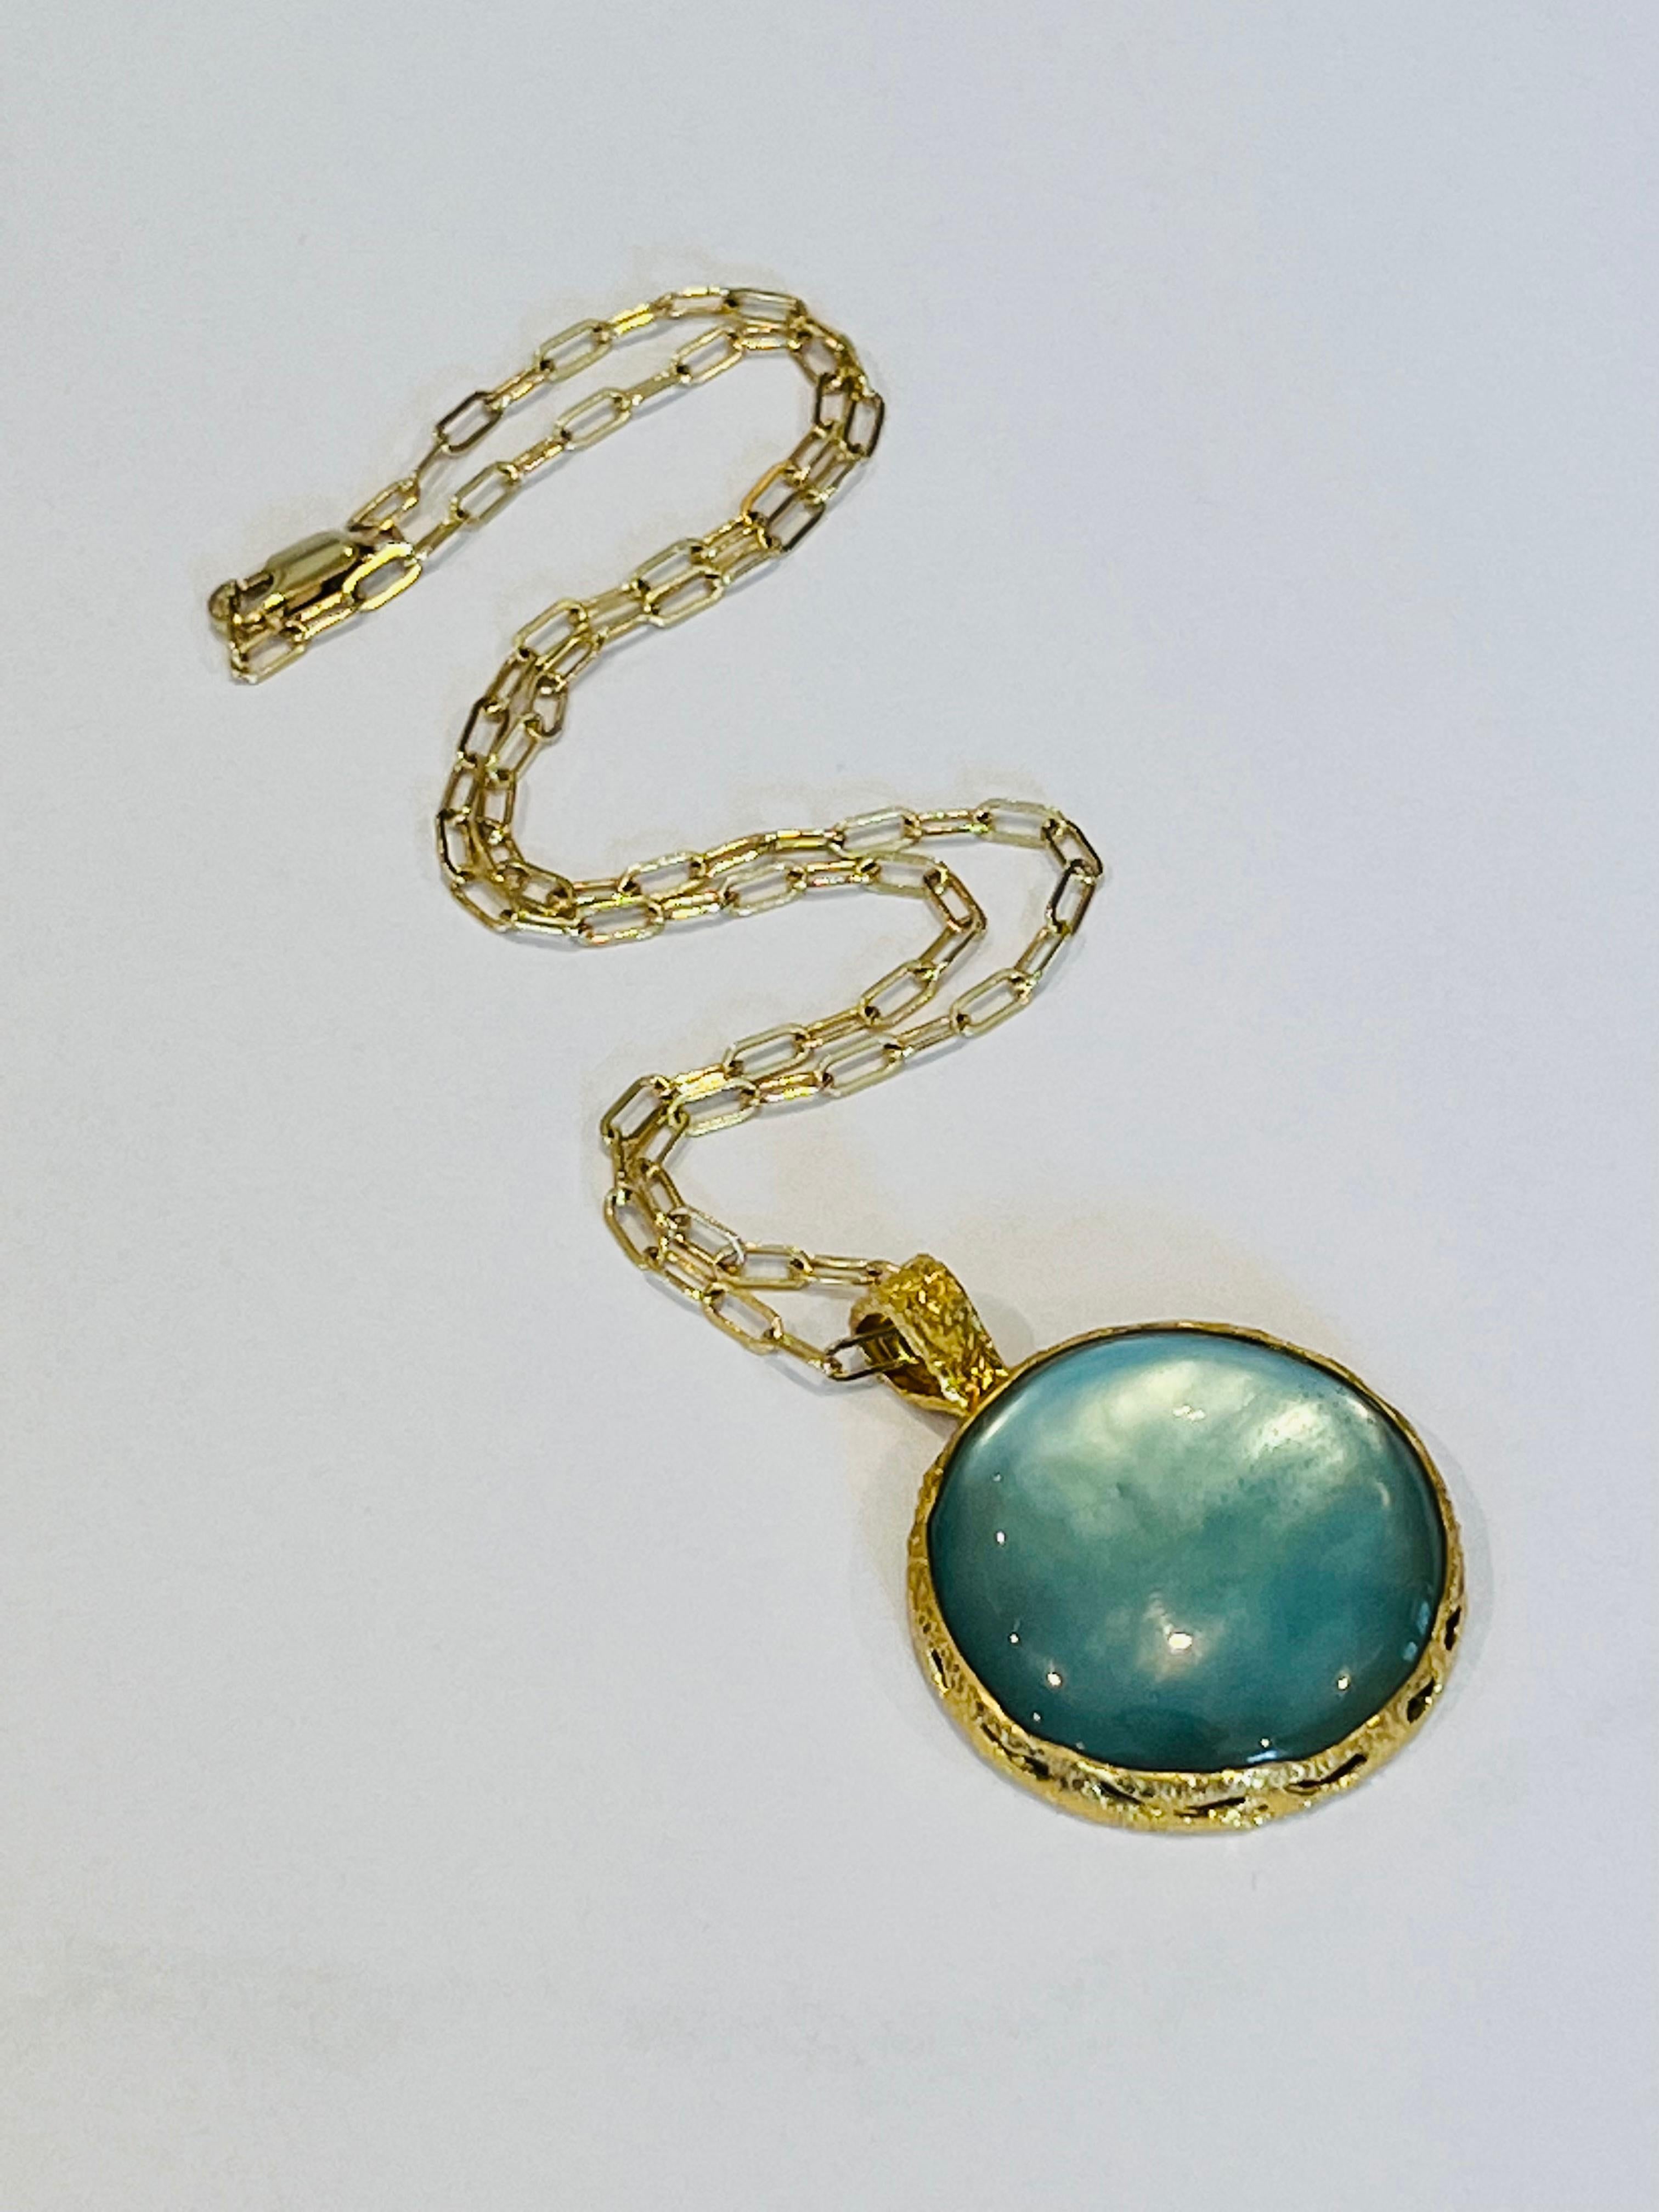 Artisan Celeste Reversible Aqua and Mother of Pearl Pendant in 22k Gold, by Tagili